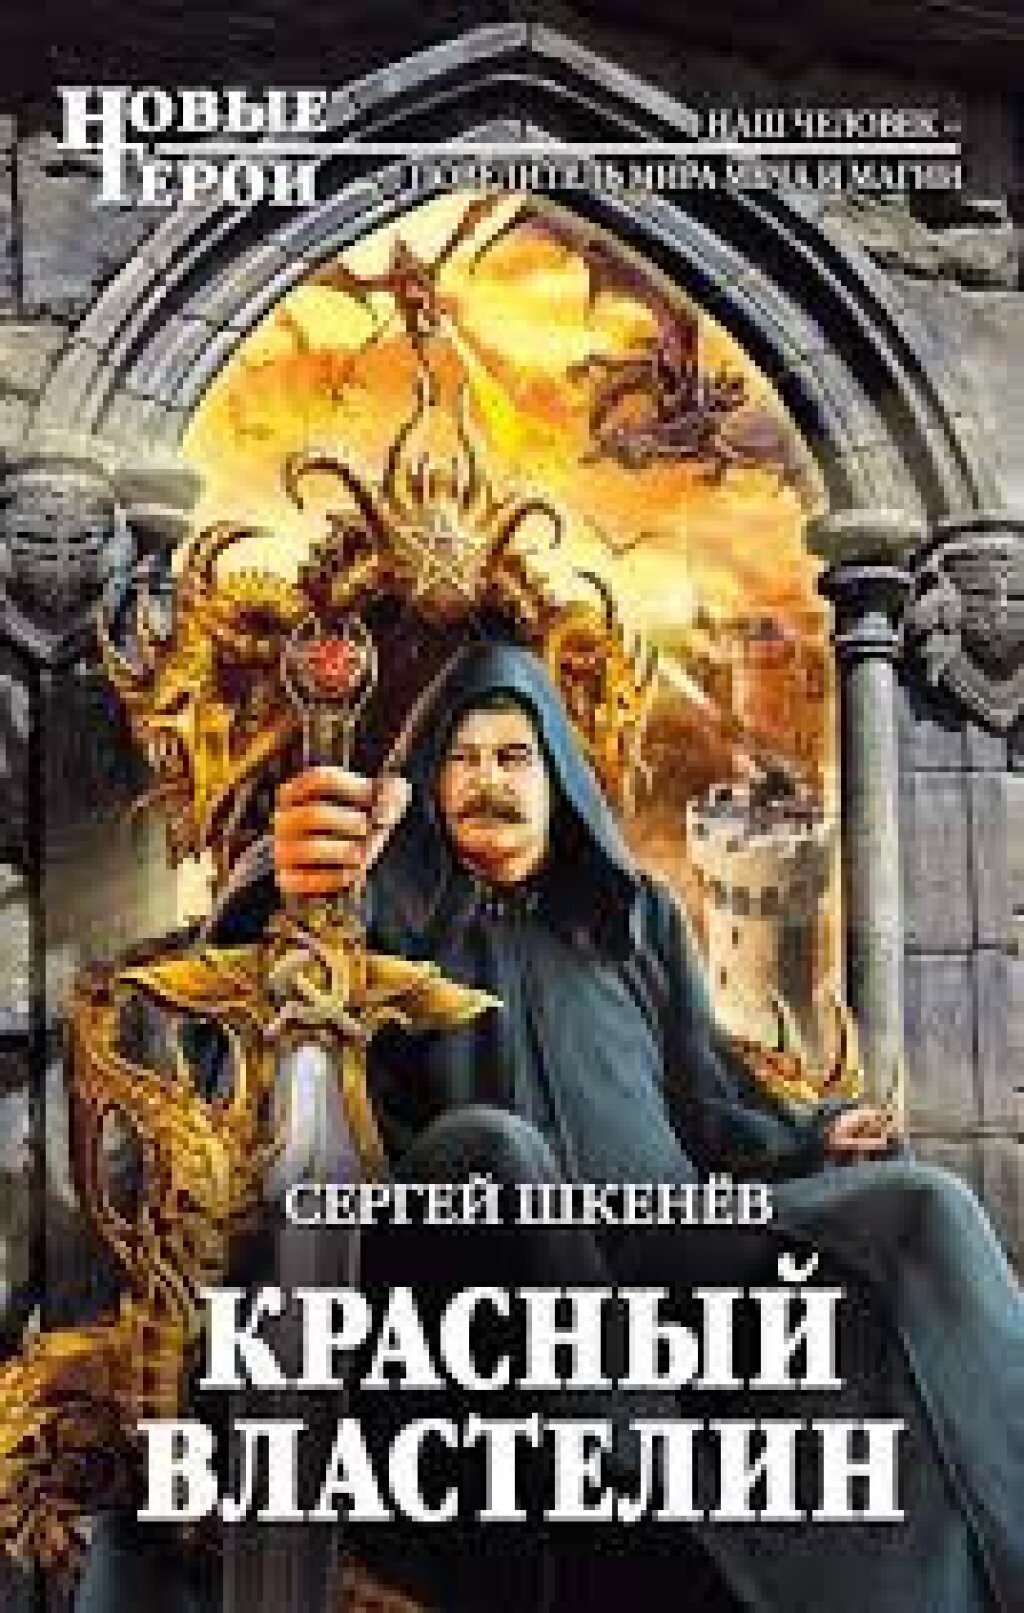 Fantasy Book Cover page
Russian Text reads as, "Красный Бластелин от Сергей Шкенёв"
English translation reads as, "The Red Lord by Sergei Shkenyov".